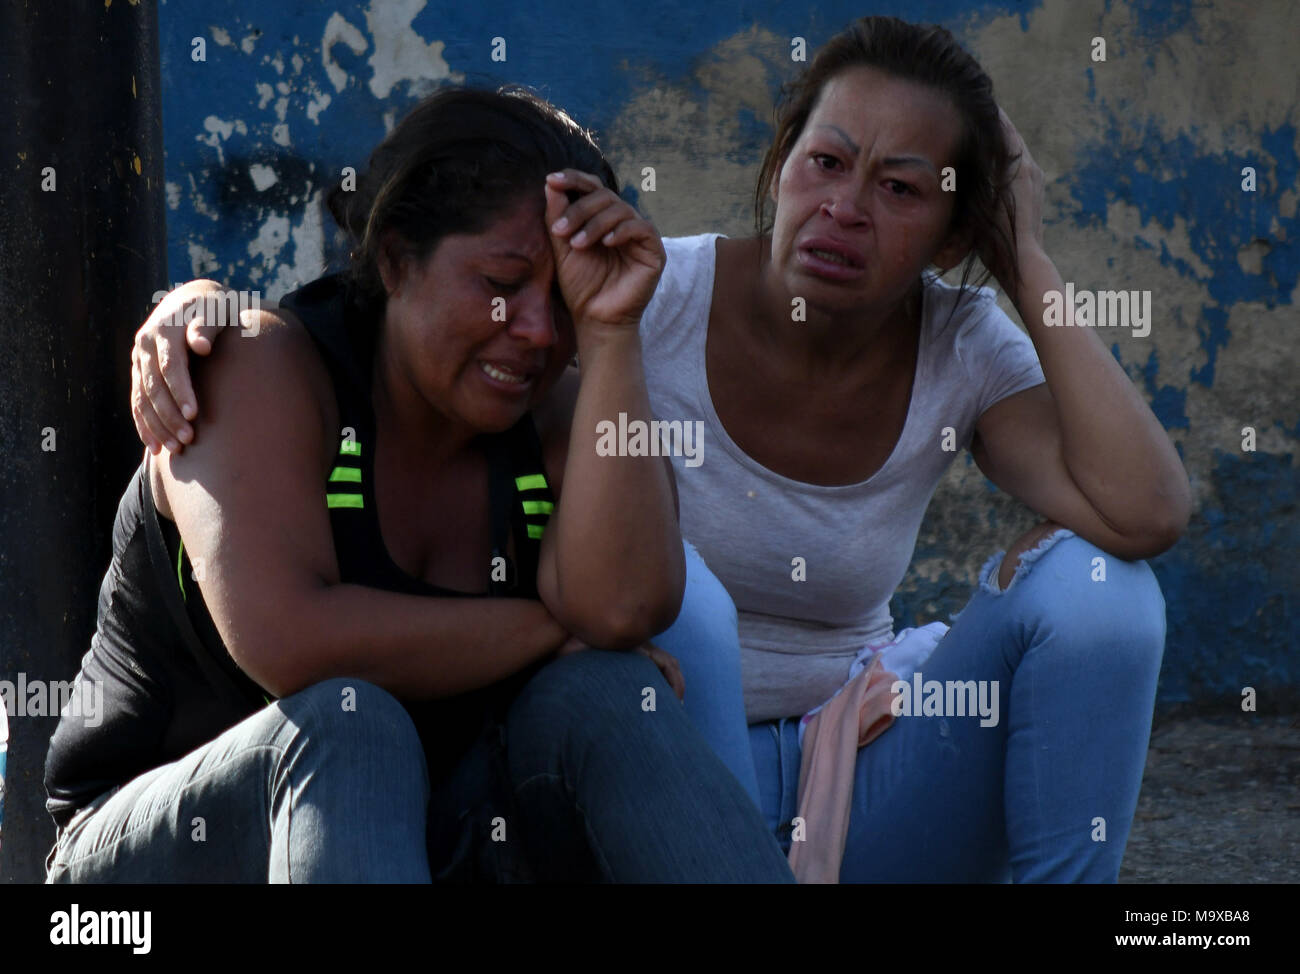 Carabobo, Venezuela. 28th Mar, 2018. Relatives react as they wait for information after an alleged fire at a Venezuelan police station, in Valencia, Carabobo state, Venezuela, on March 28, 2018. A prison riot and fire has broken out at a Venezuelan police station in the central city of Valencia and at least 68 people were killed, Venezuelan officials said Wednesday. Credit: Roman Camacho/SOPA/ZUMAPRESS/Xinhua/Alamy Live News Stock Photo